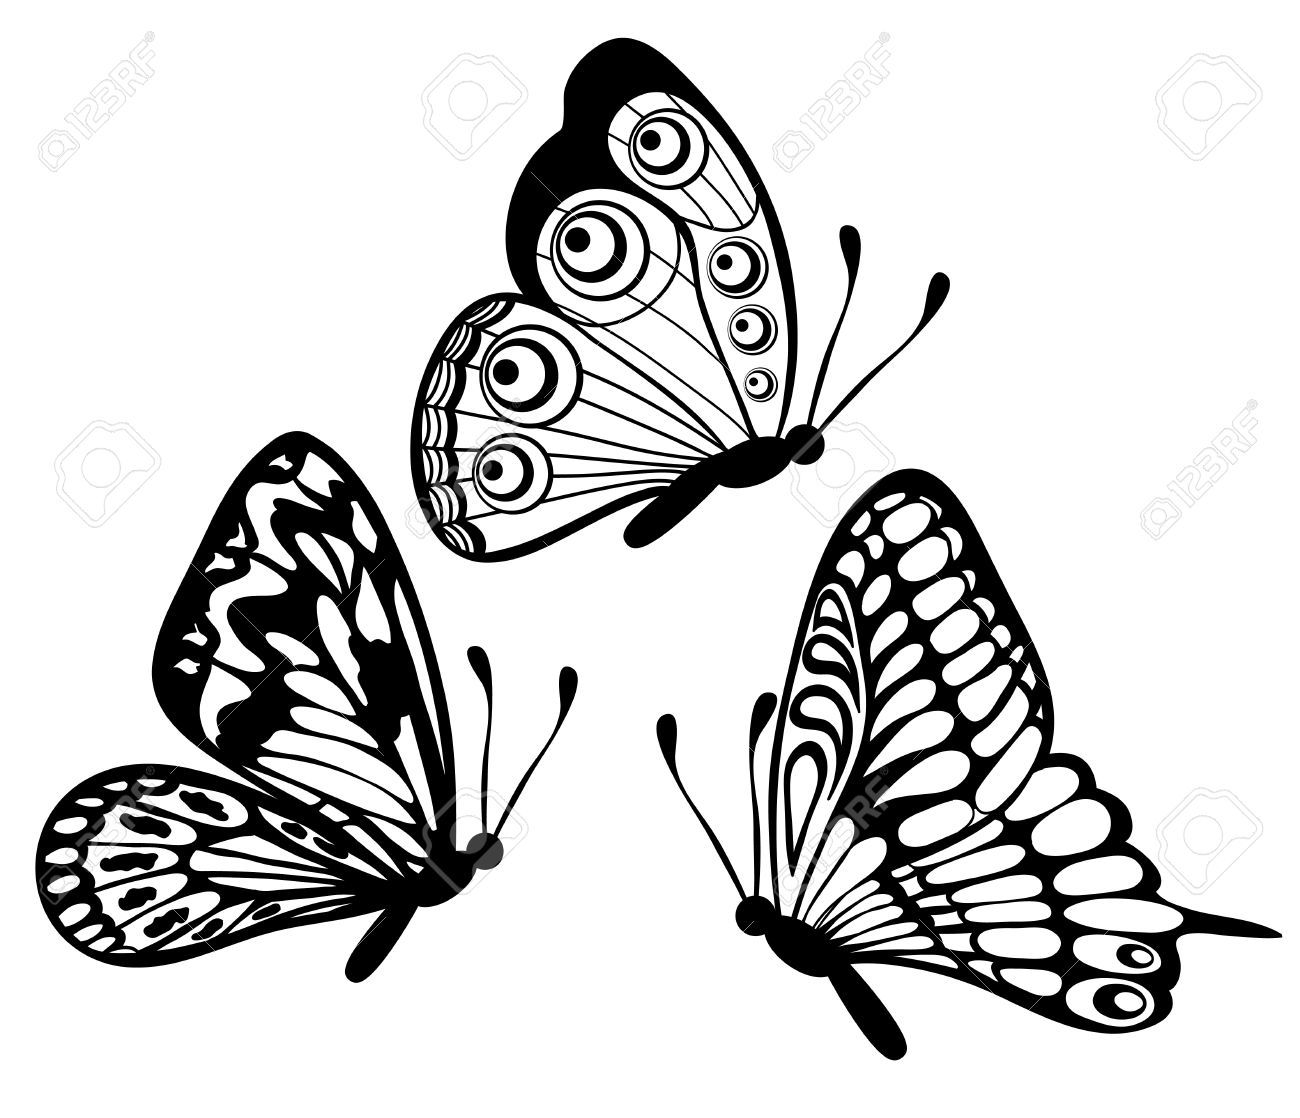 Butterfly flying clipart.